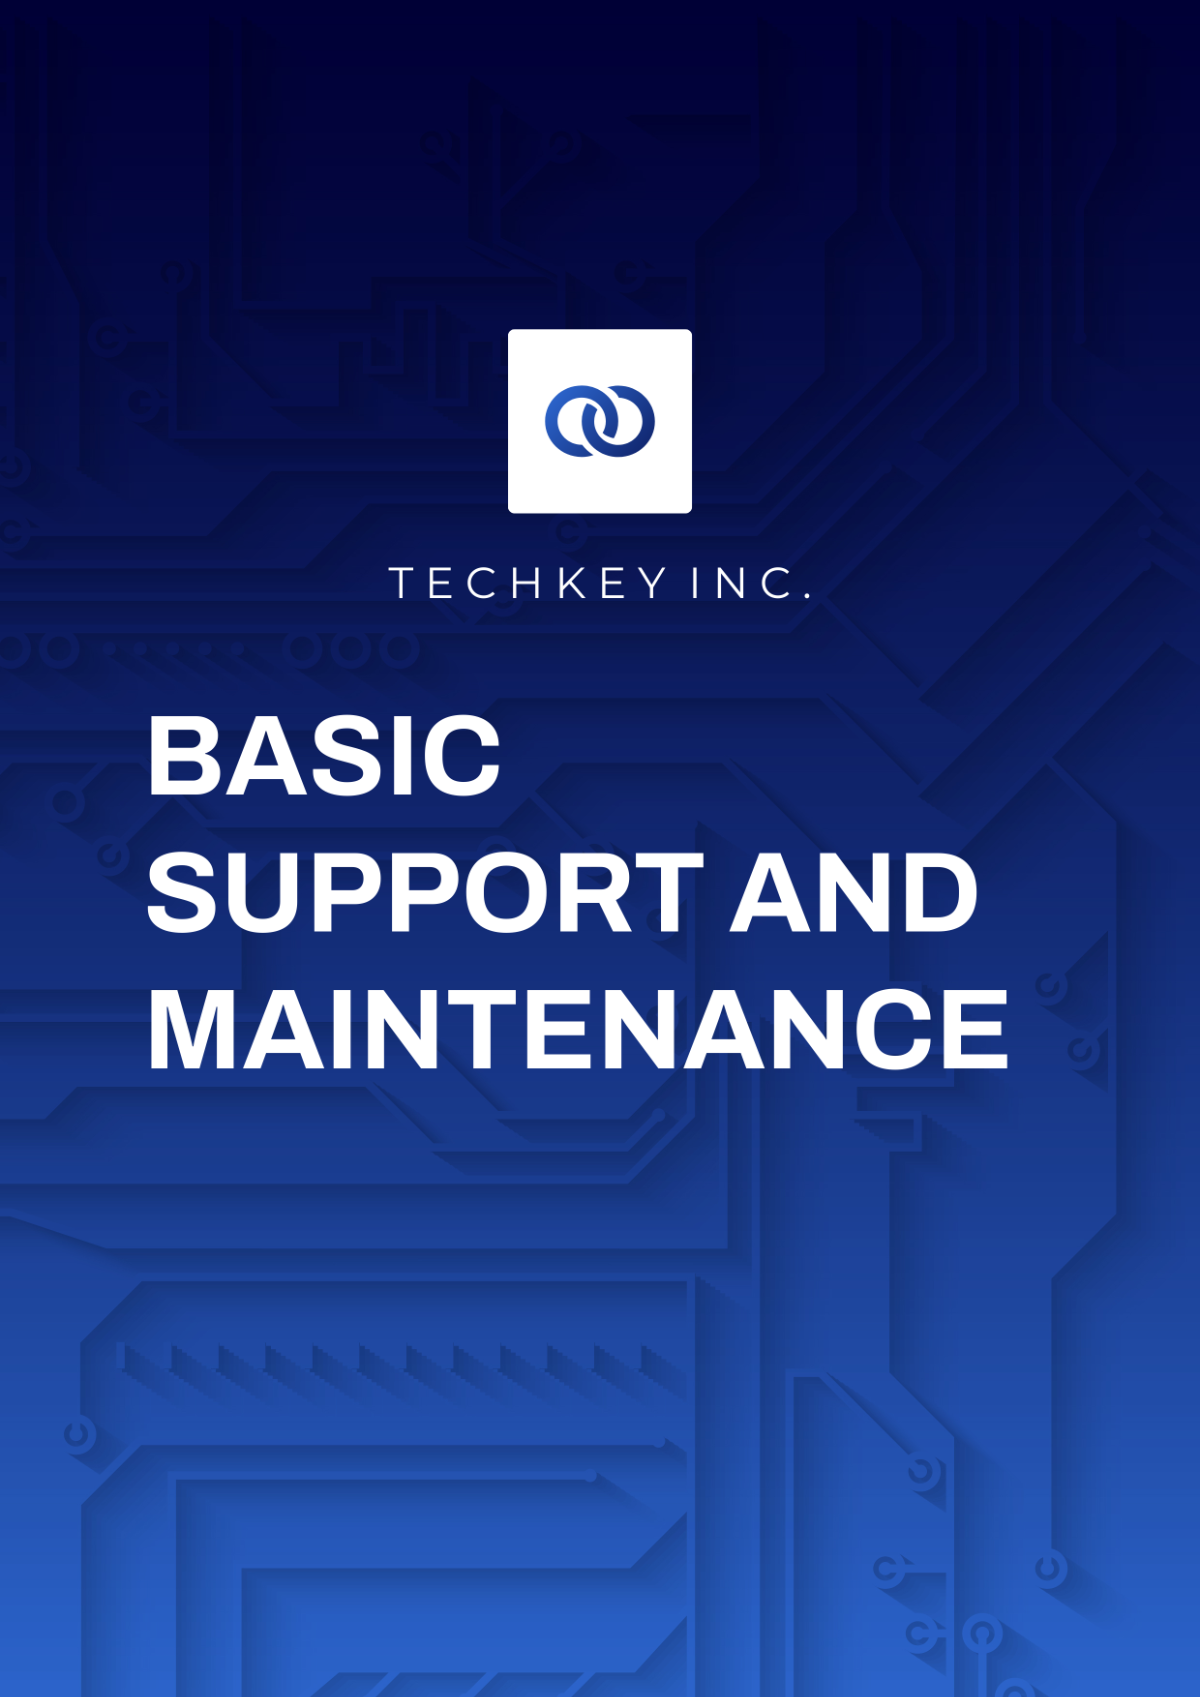 Basic Support and Maintenance Template